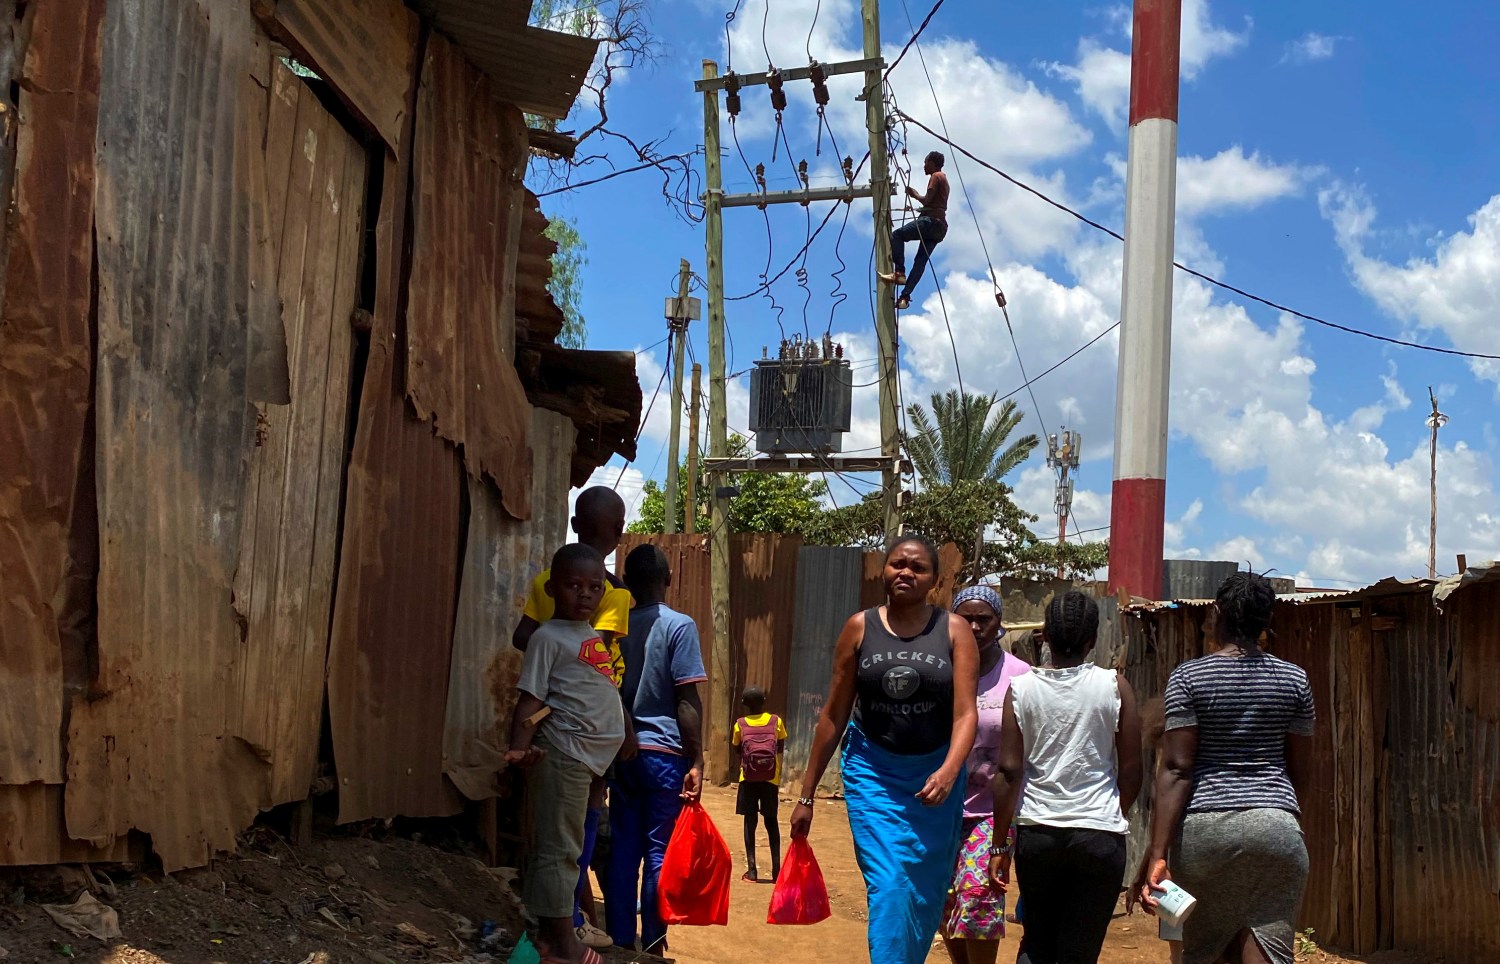 Residents walk through a walkway as a man connects electricity above the power transformer in a village in the Kibera slums in Nairobi, Kenya April 2, 2021. REUTERS/Thomas Mukoya